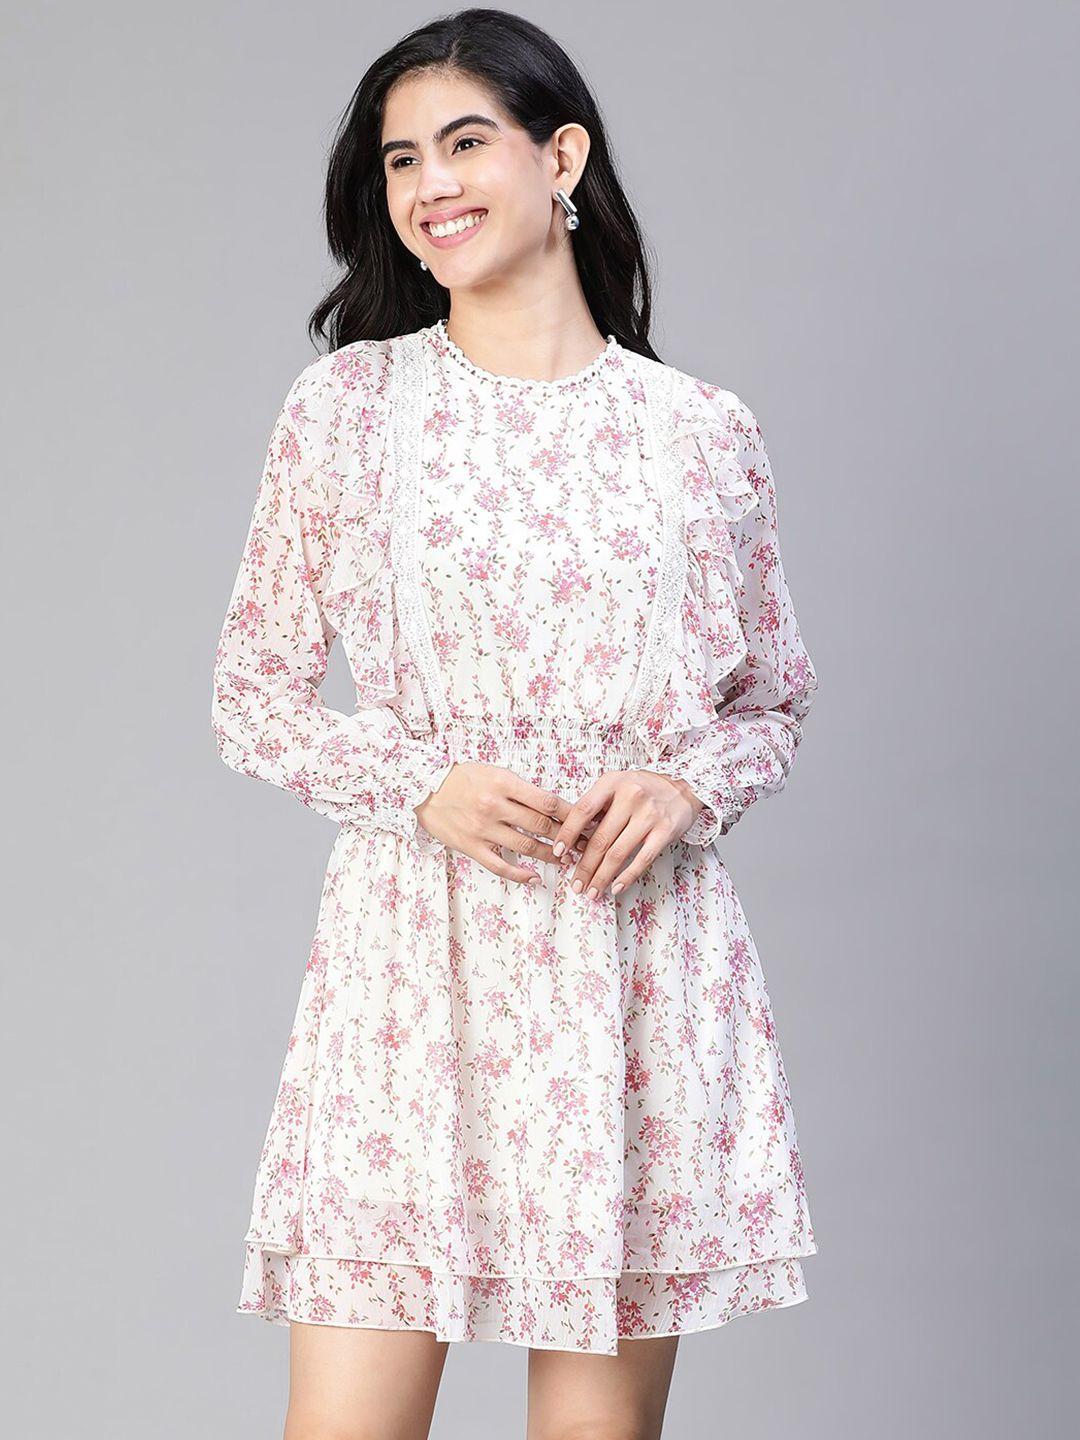 oxolloxo floral printed puff sleeve chiffon fit & flare dress